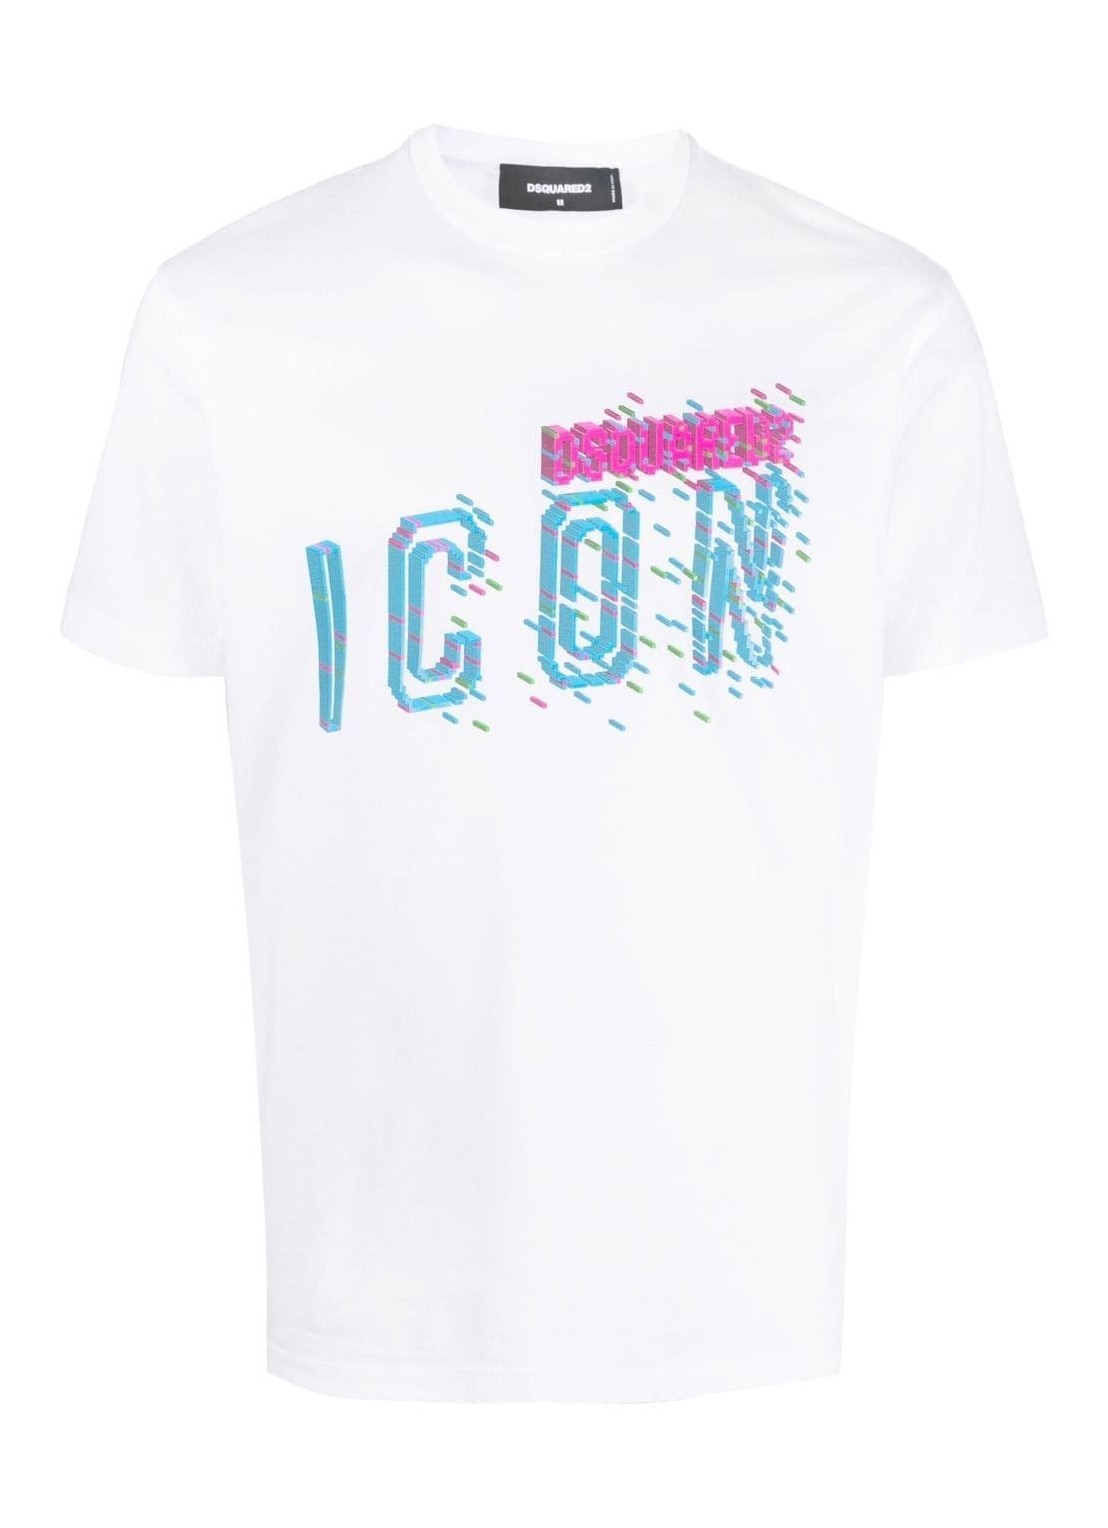 Camiseta dsquared t-shirt man pixeled icon cool fit tee s79gc0078s23009 100 talla L
 